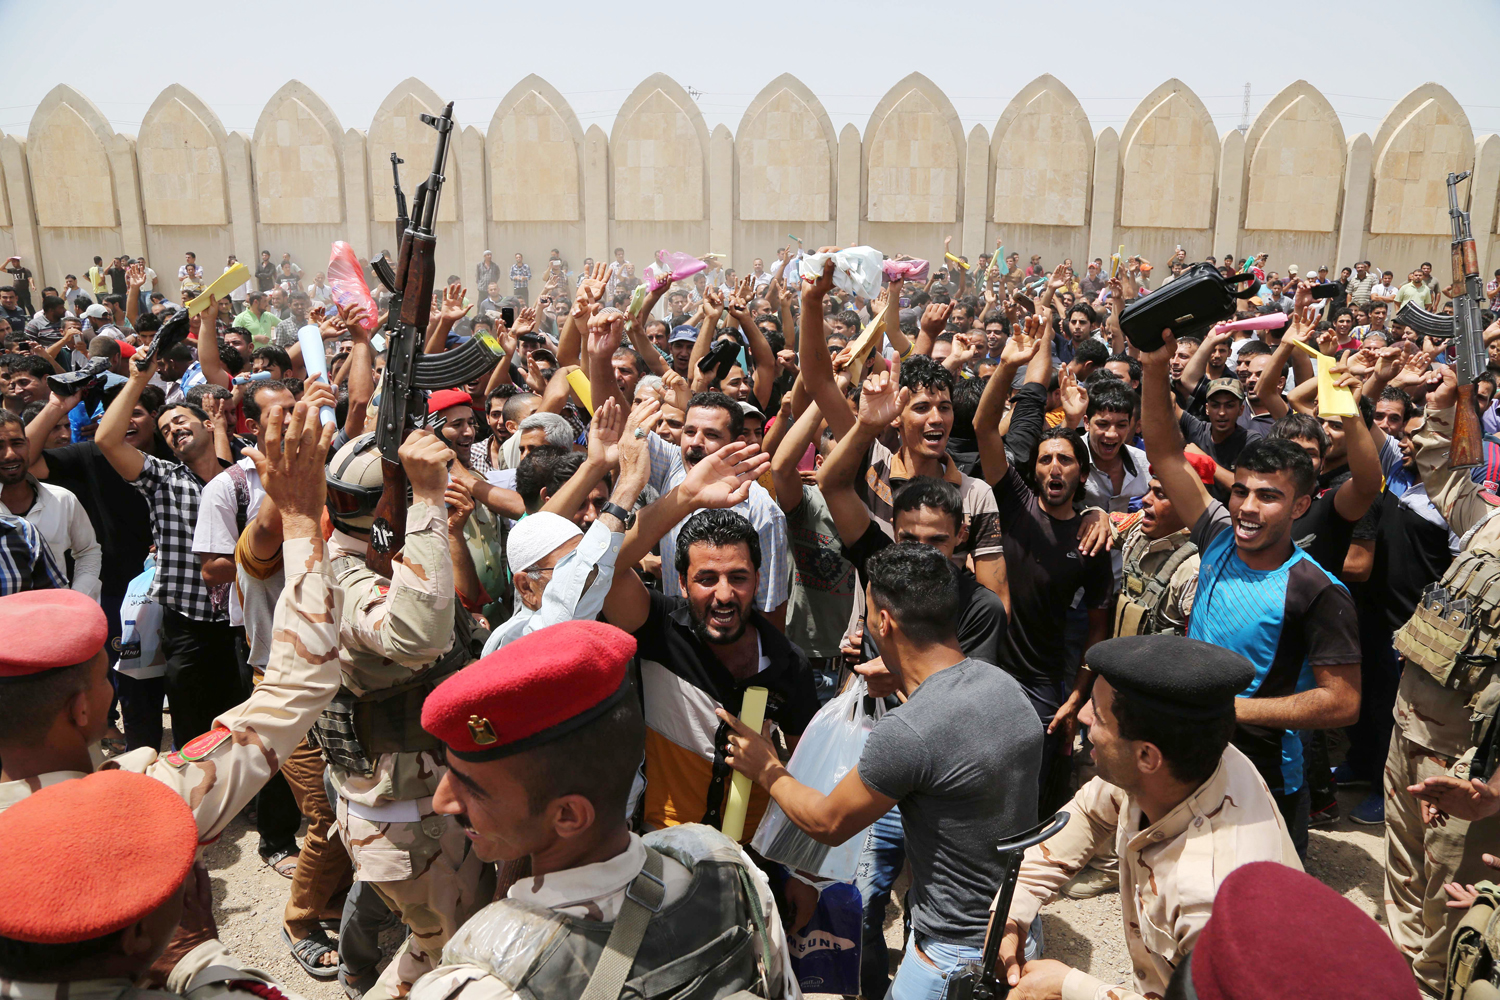 Men chant slogans against the al-Qaida breakaway group Islamic State of Iraq and Greater Syria (ISIS), outside of the main army recruiting center to volunteer for military service in Baghdad, June 12, 2014.